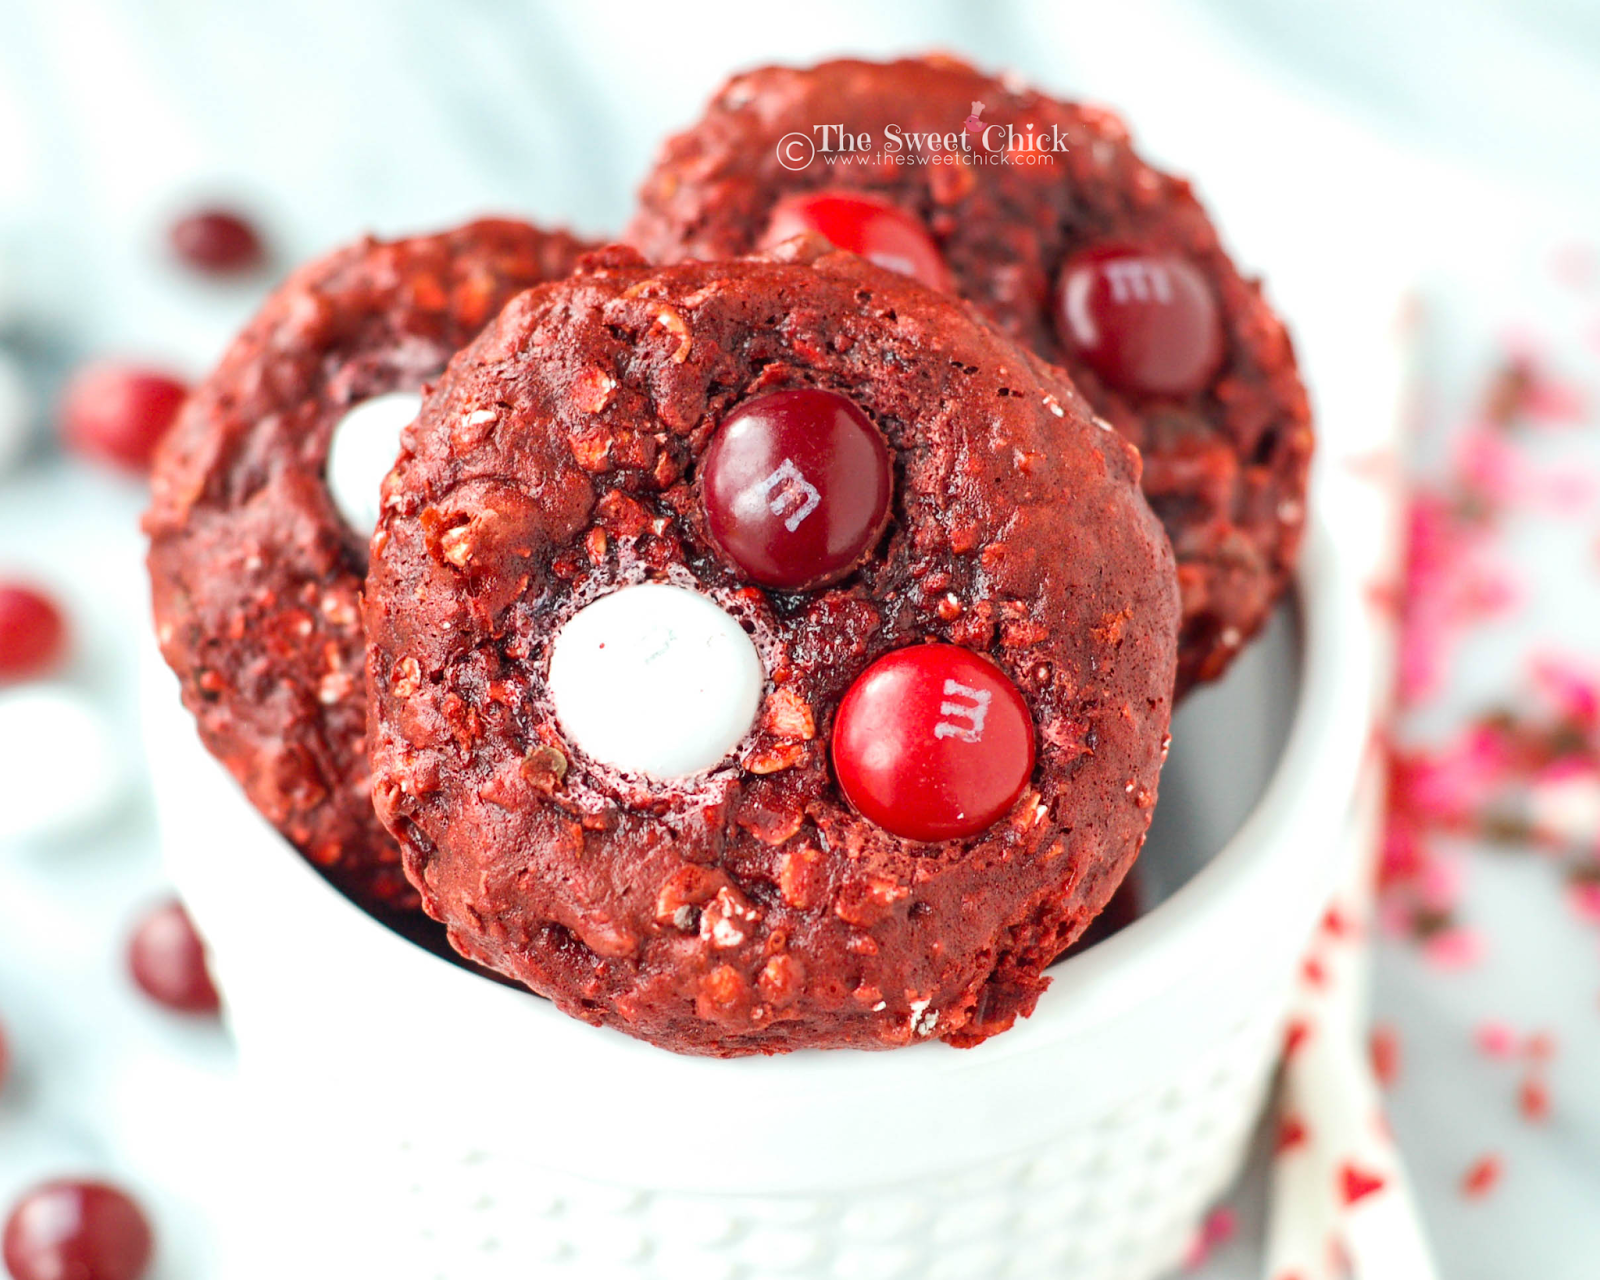 Red Velvet Oatmeal Banana Cookies by The Sweet Chick